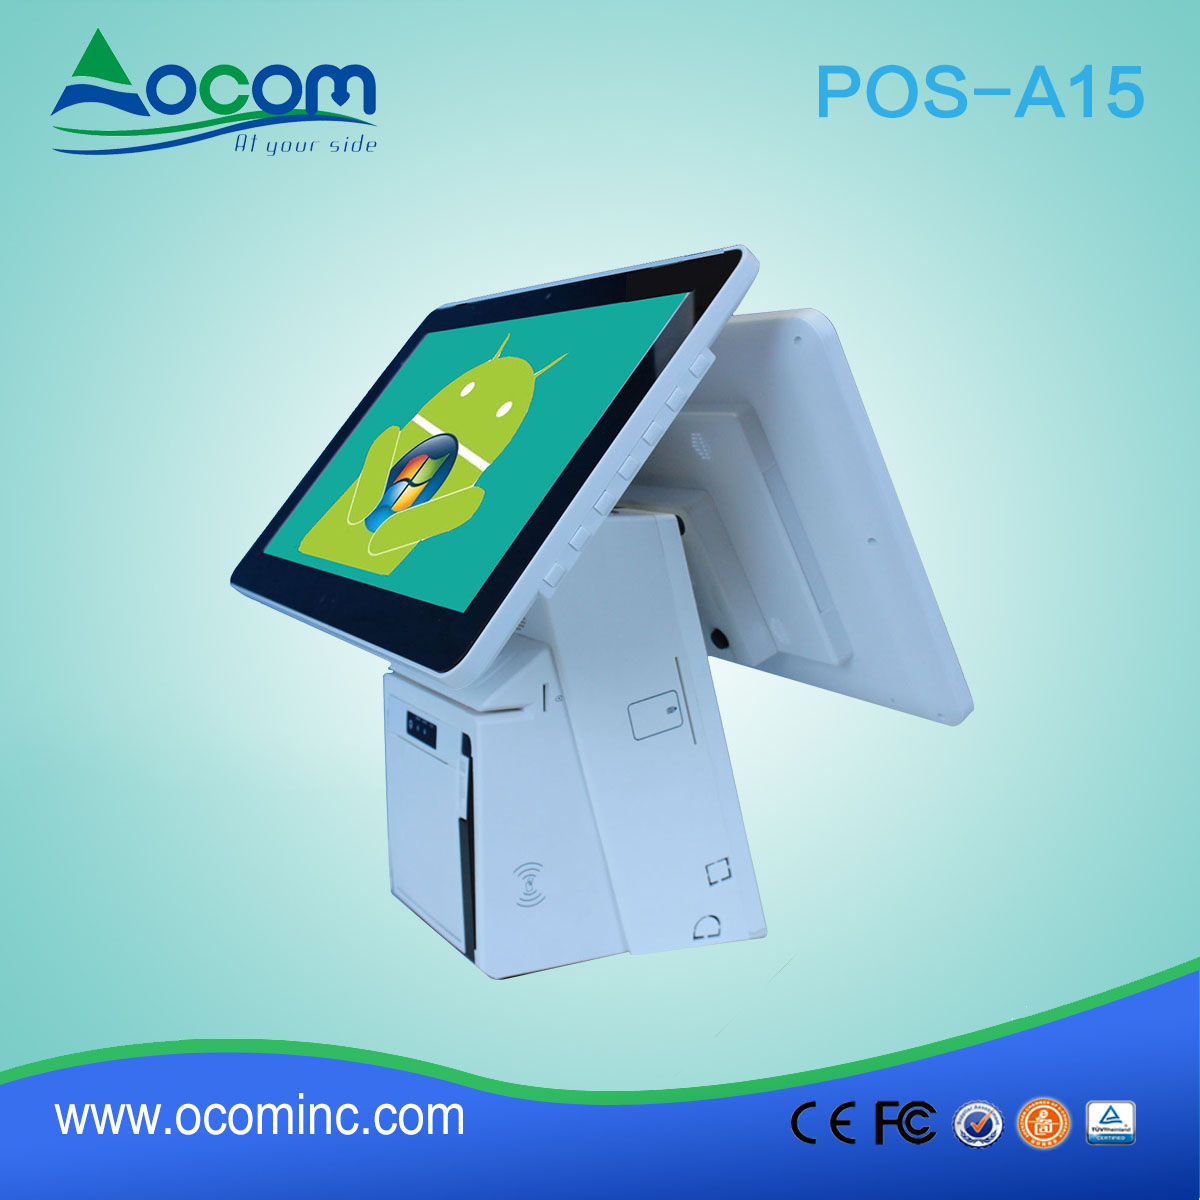 15.6" Windows Android all in one pos terminal price with 2" or 3" thermal printer